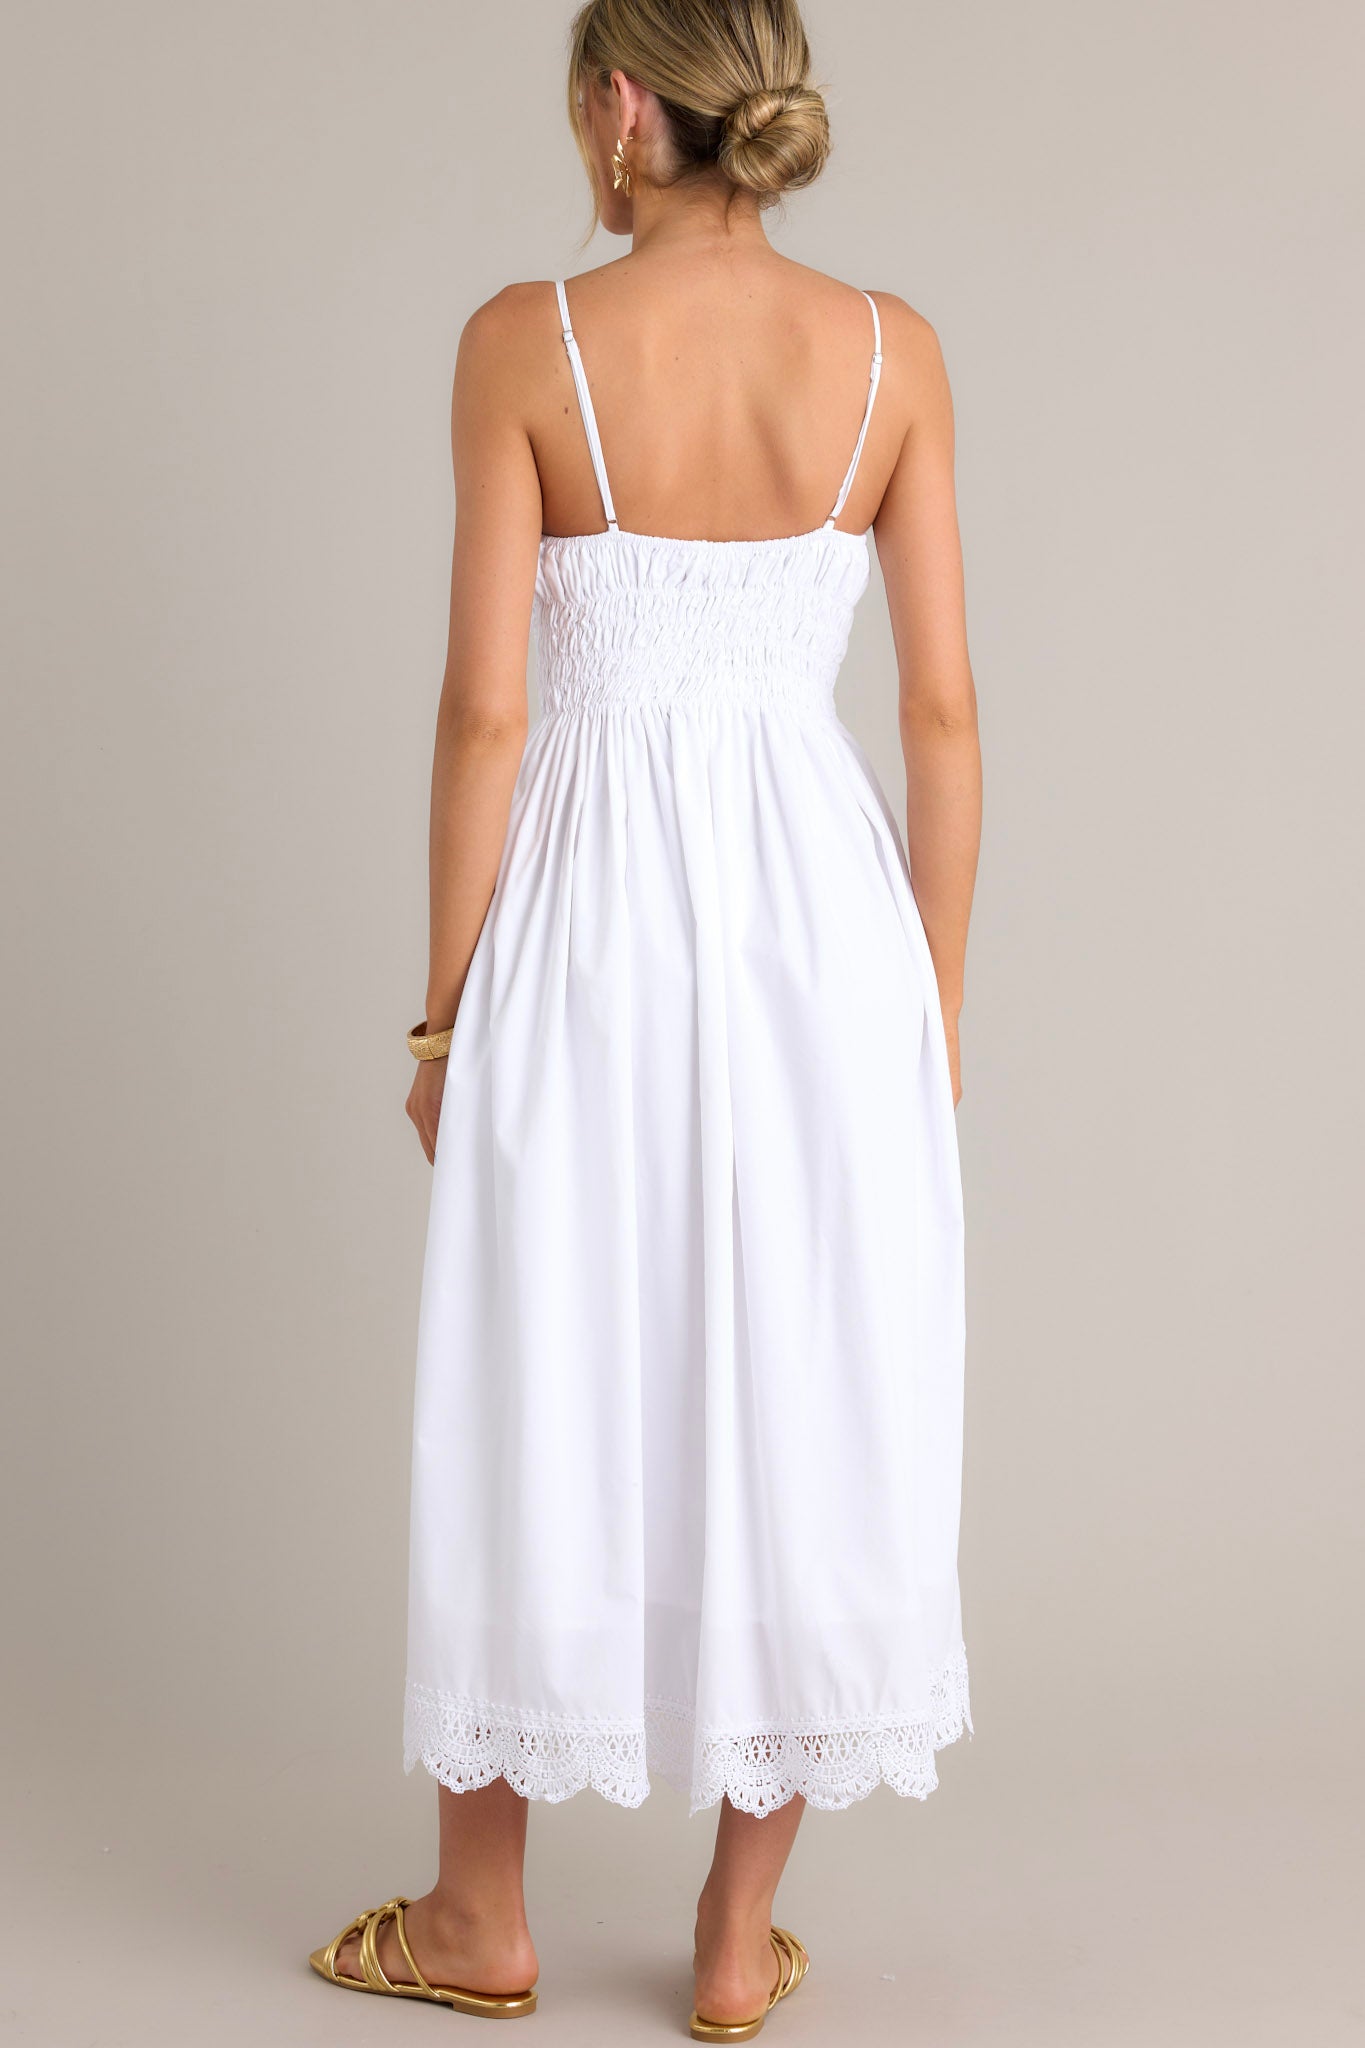 Back view of a white maxi dress highlighting the thin adjustable straps, fully smocked back, and lace hemline.